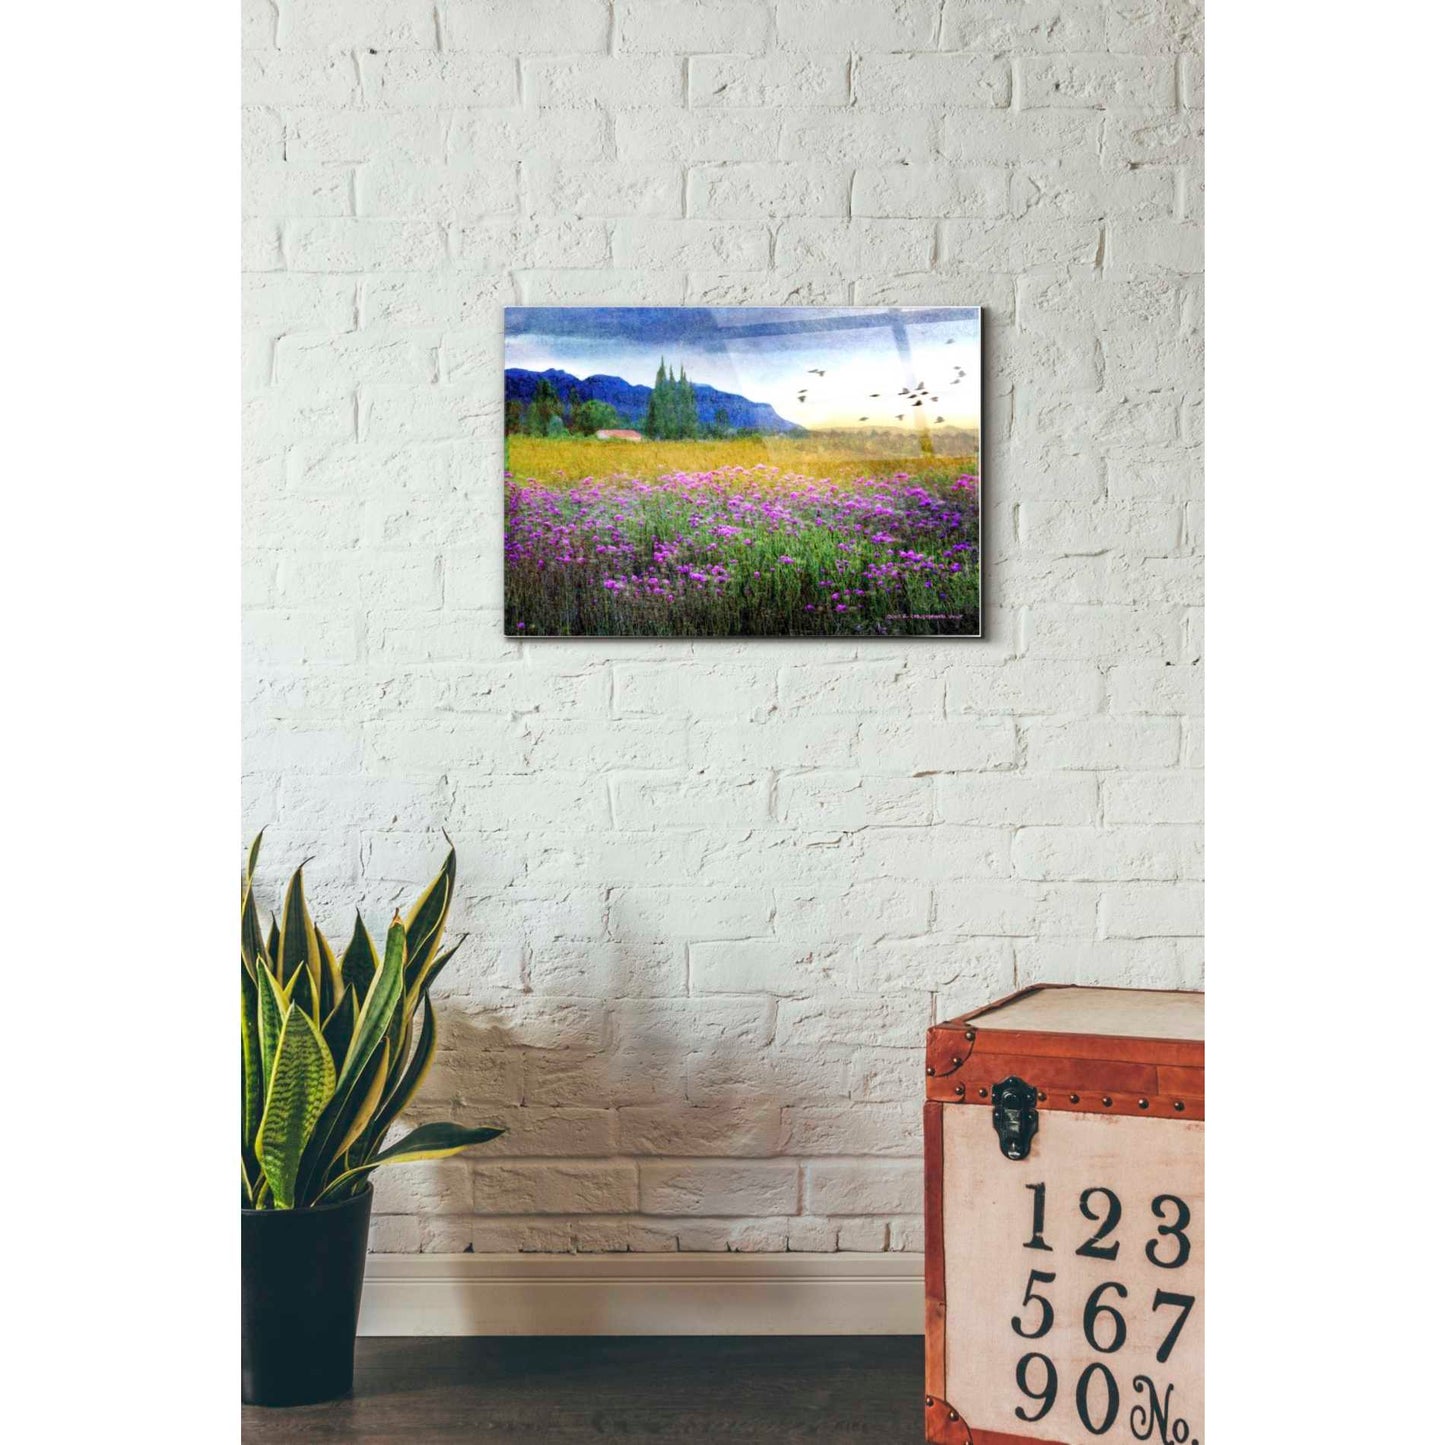 Epic Art 'Mesa Verde and Knapweed' by Chris Vest, Acrylic Glass Wall Art,16x24